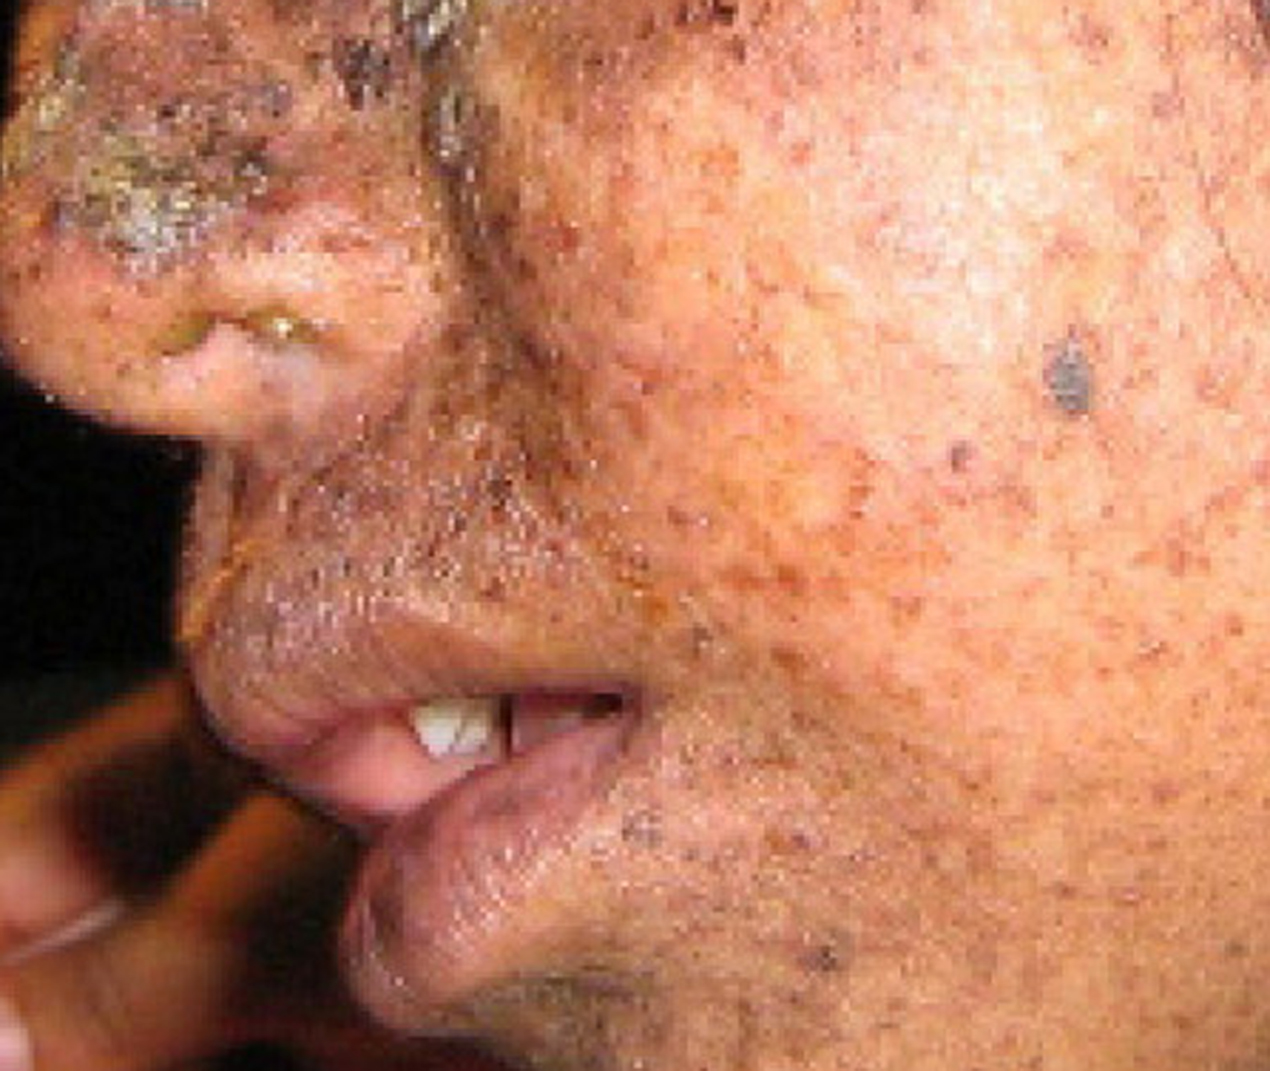 Photo shows a person with mottled skin lesions that result from xermoderma pigmentosa.